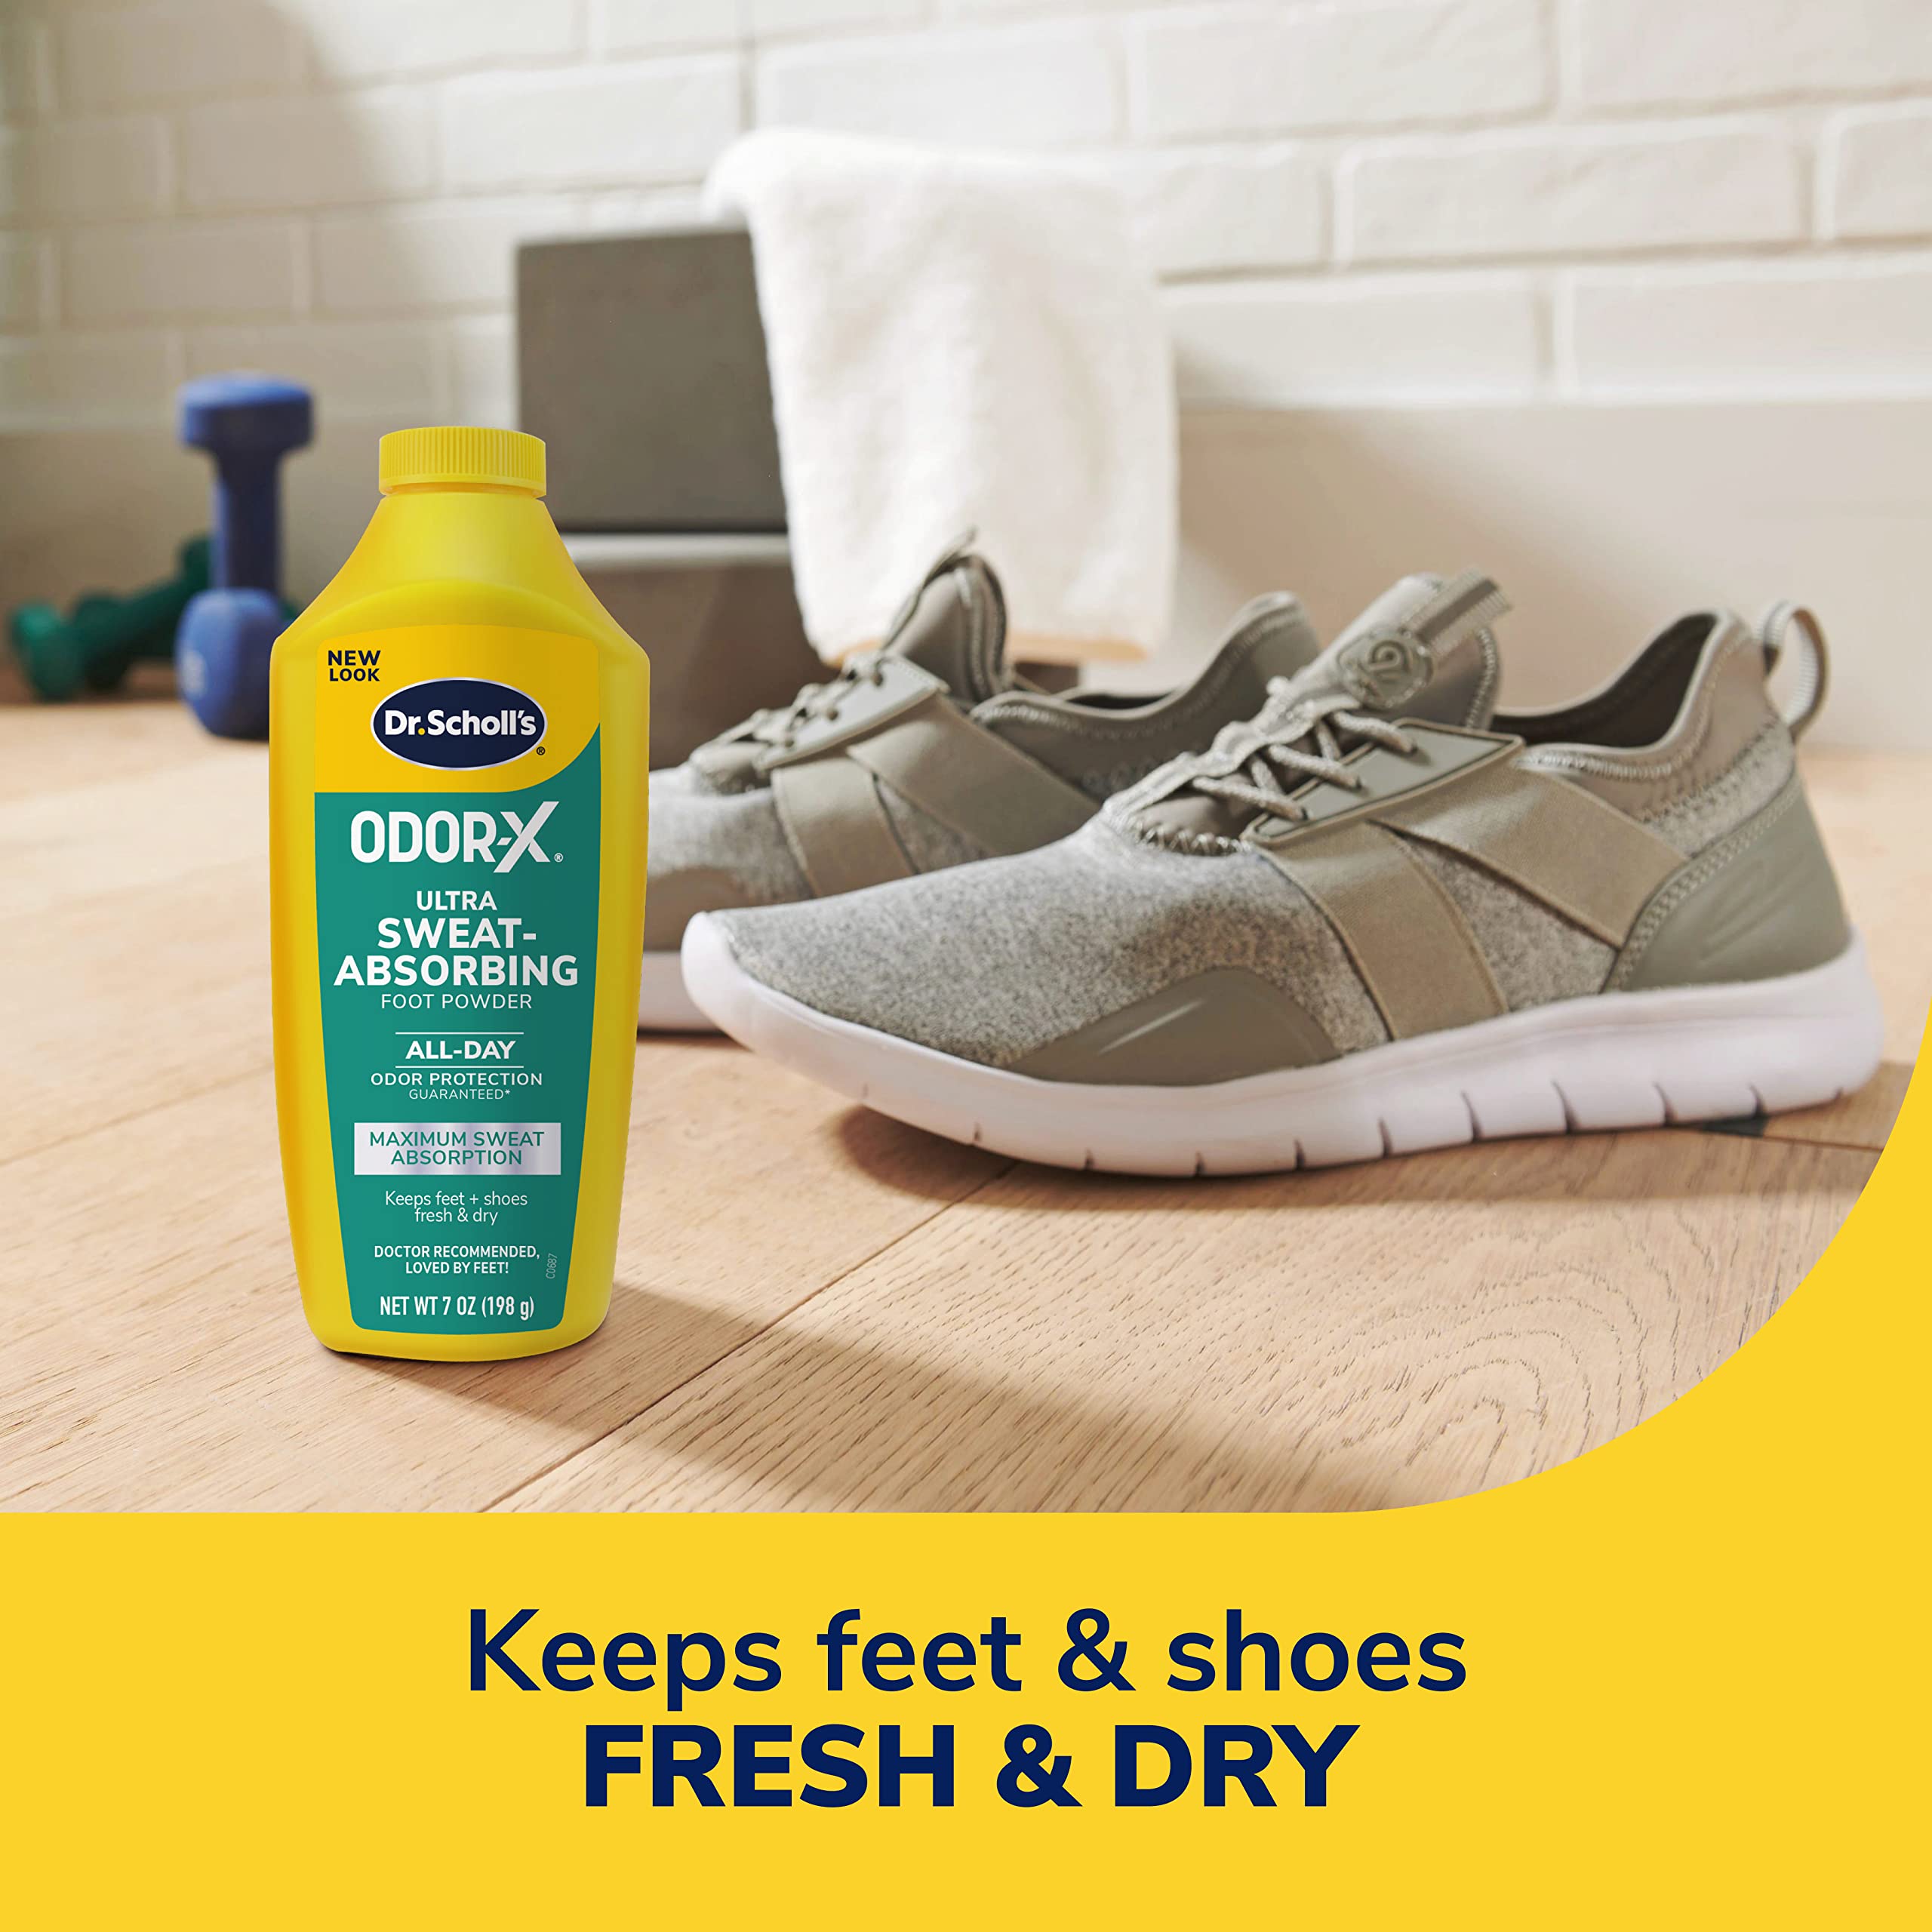 Dr. Scholl's Ultra-Sweat Absorbing Foot Powder, 7 oz // Maximum Sweat Absorption, All-Day Odor Protection, Keeps Feet Fresh & Dry